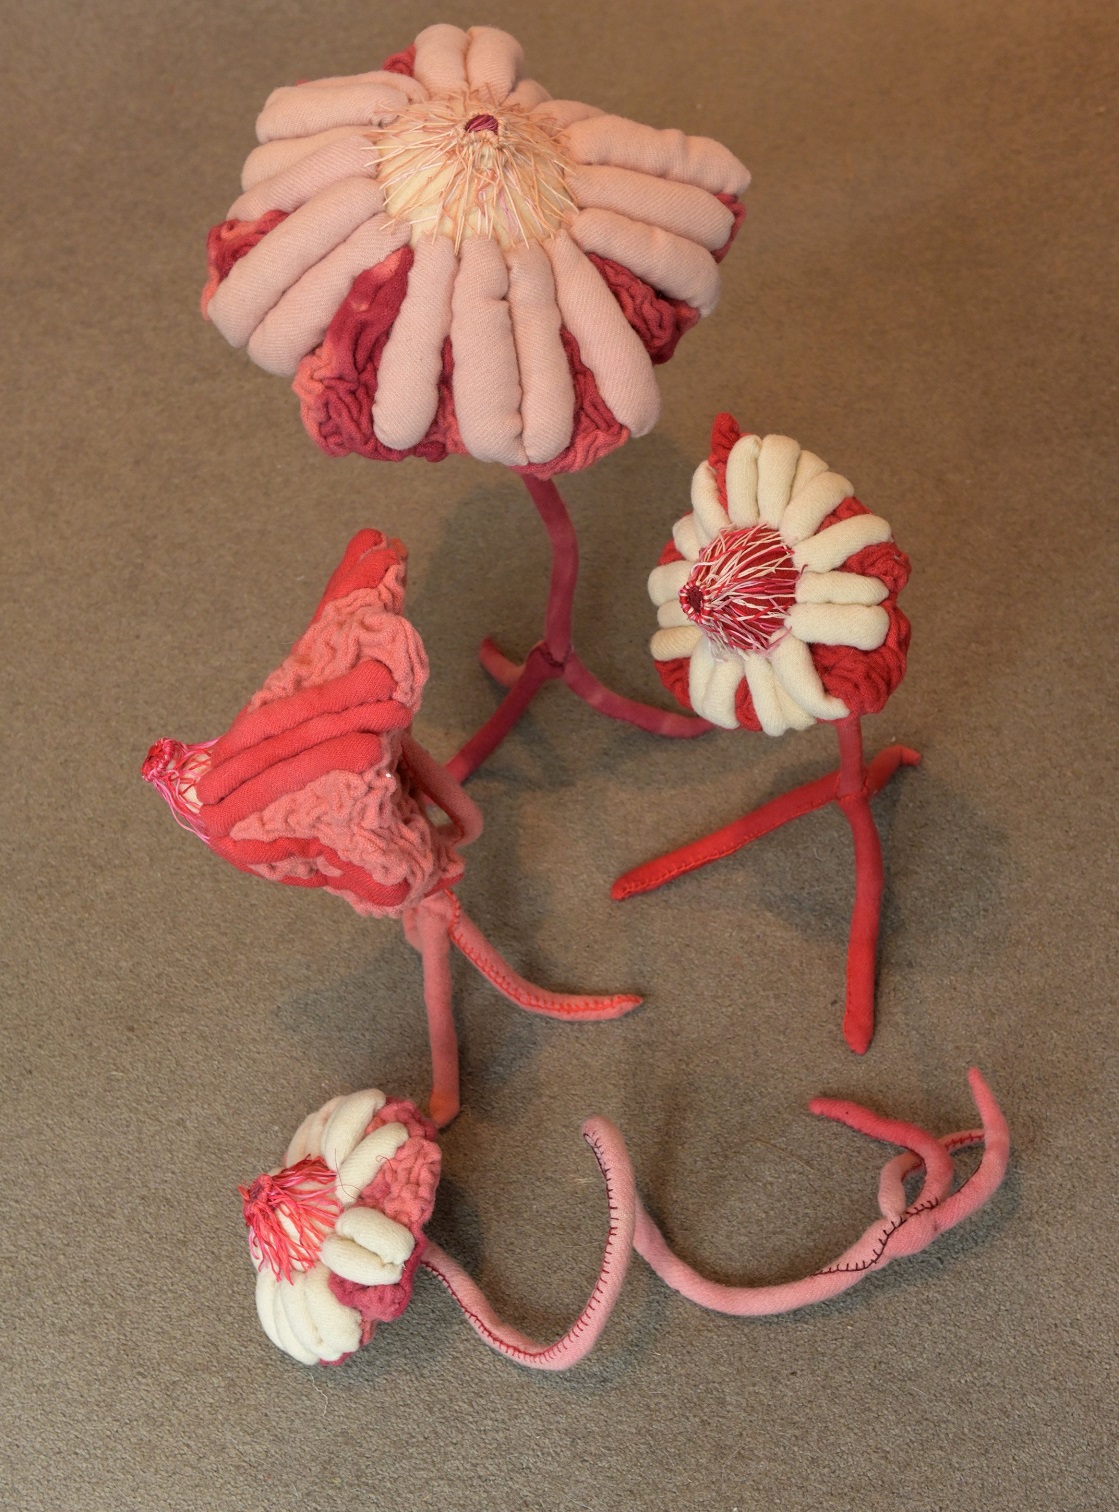 A collection of the smaller breast "flowers".